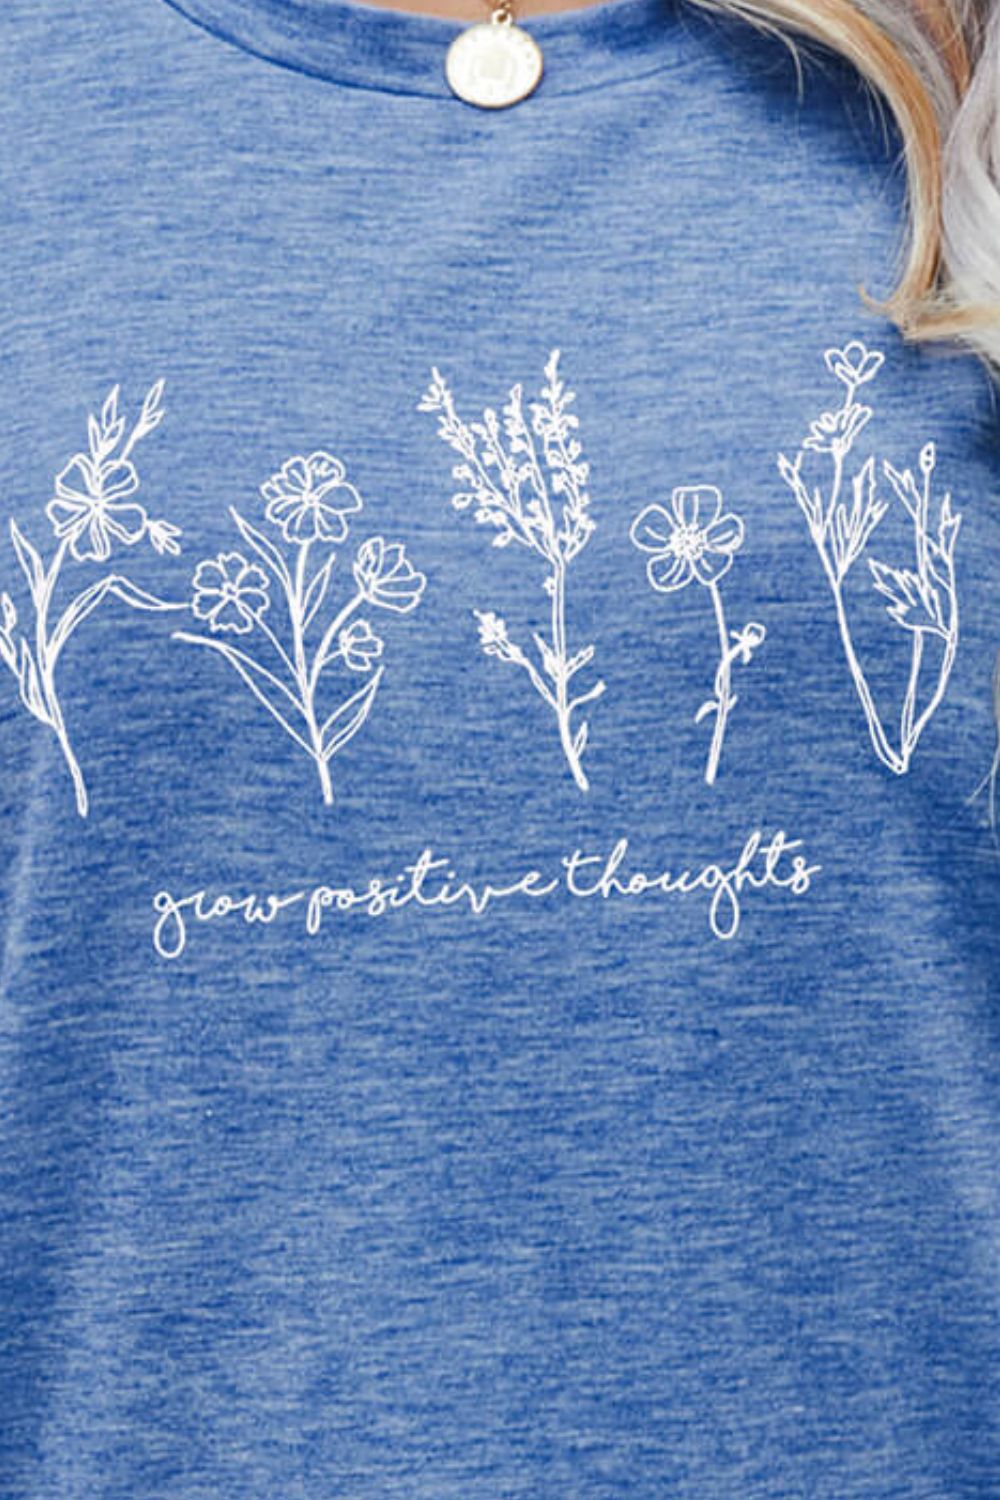 Grow Positive Thoughts Graphic Tee | 6 colors |